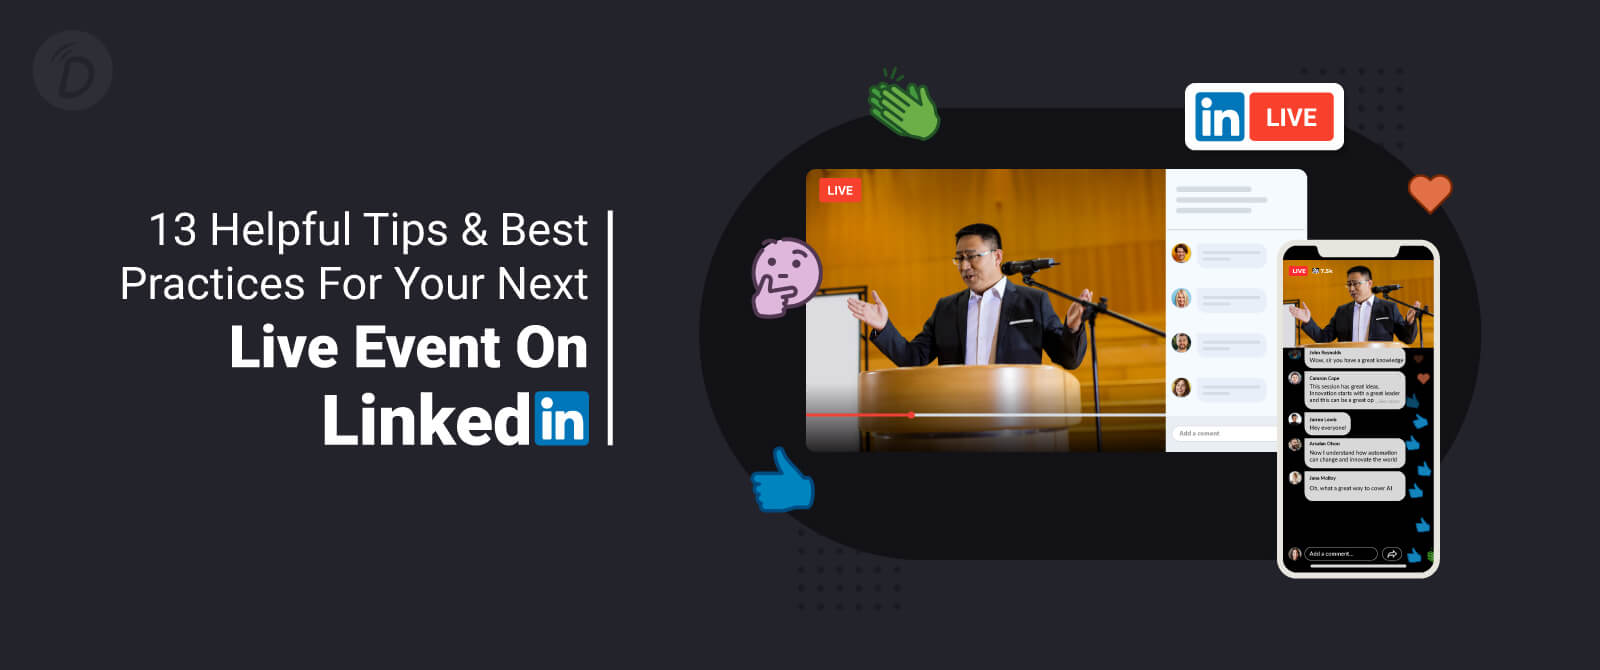 13 Helpful Tips & Best Practices for Your Next Live Event on LinkedIn